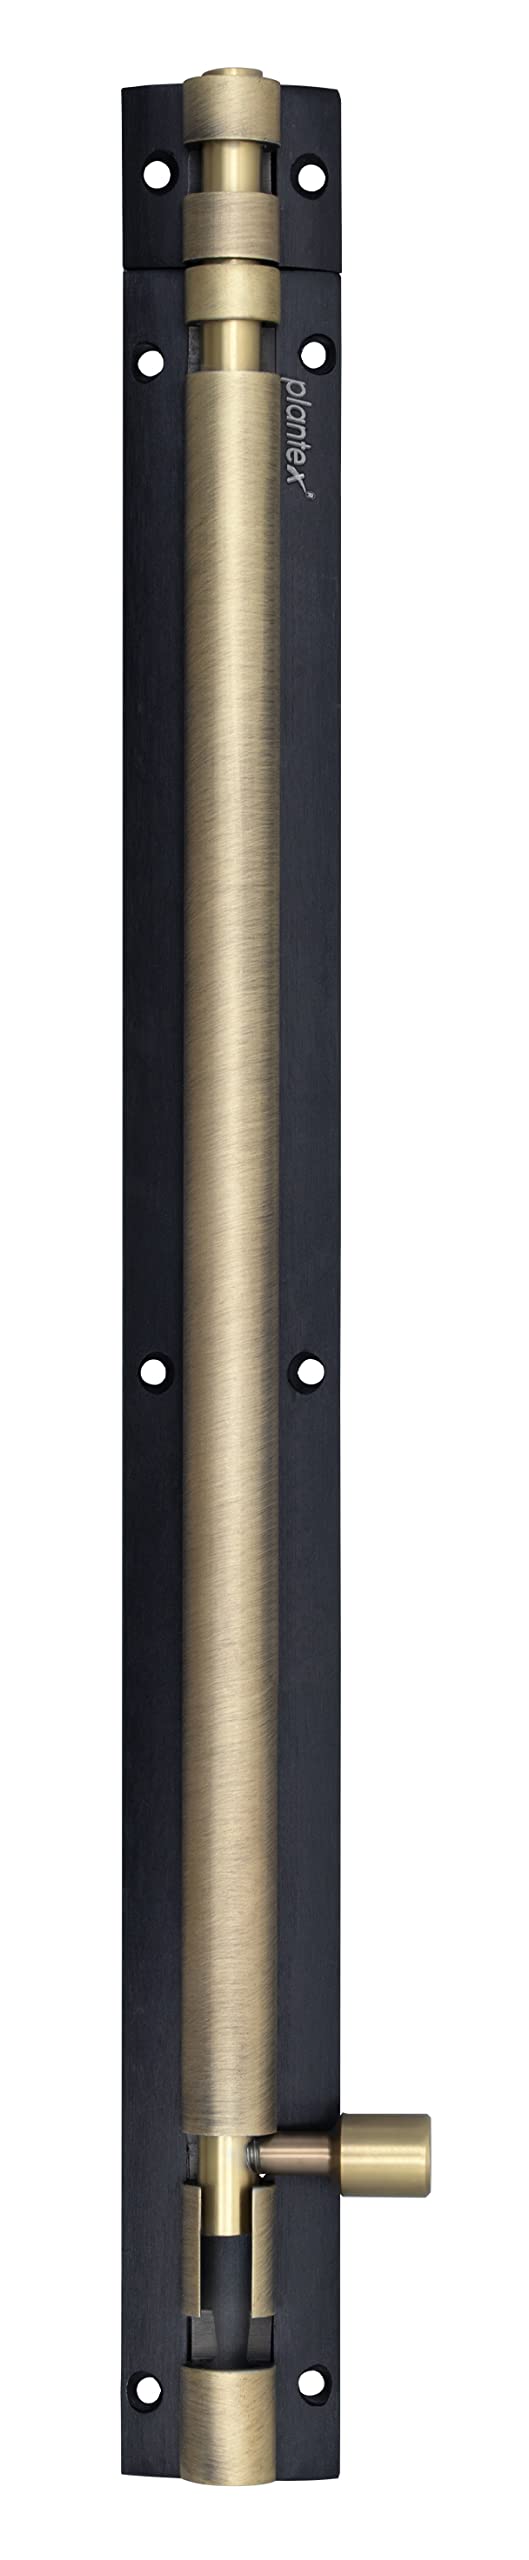 Plantex Heavy Duty 12-inch Joint-Less Tower Bolt for Wooden and PVC Doors for Home Main Door/Bathroom/Windows/Wardrobe - Pack of 1 (703, Brass Antique and Black)